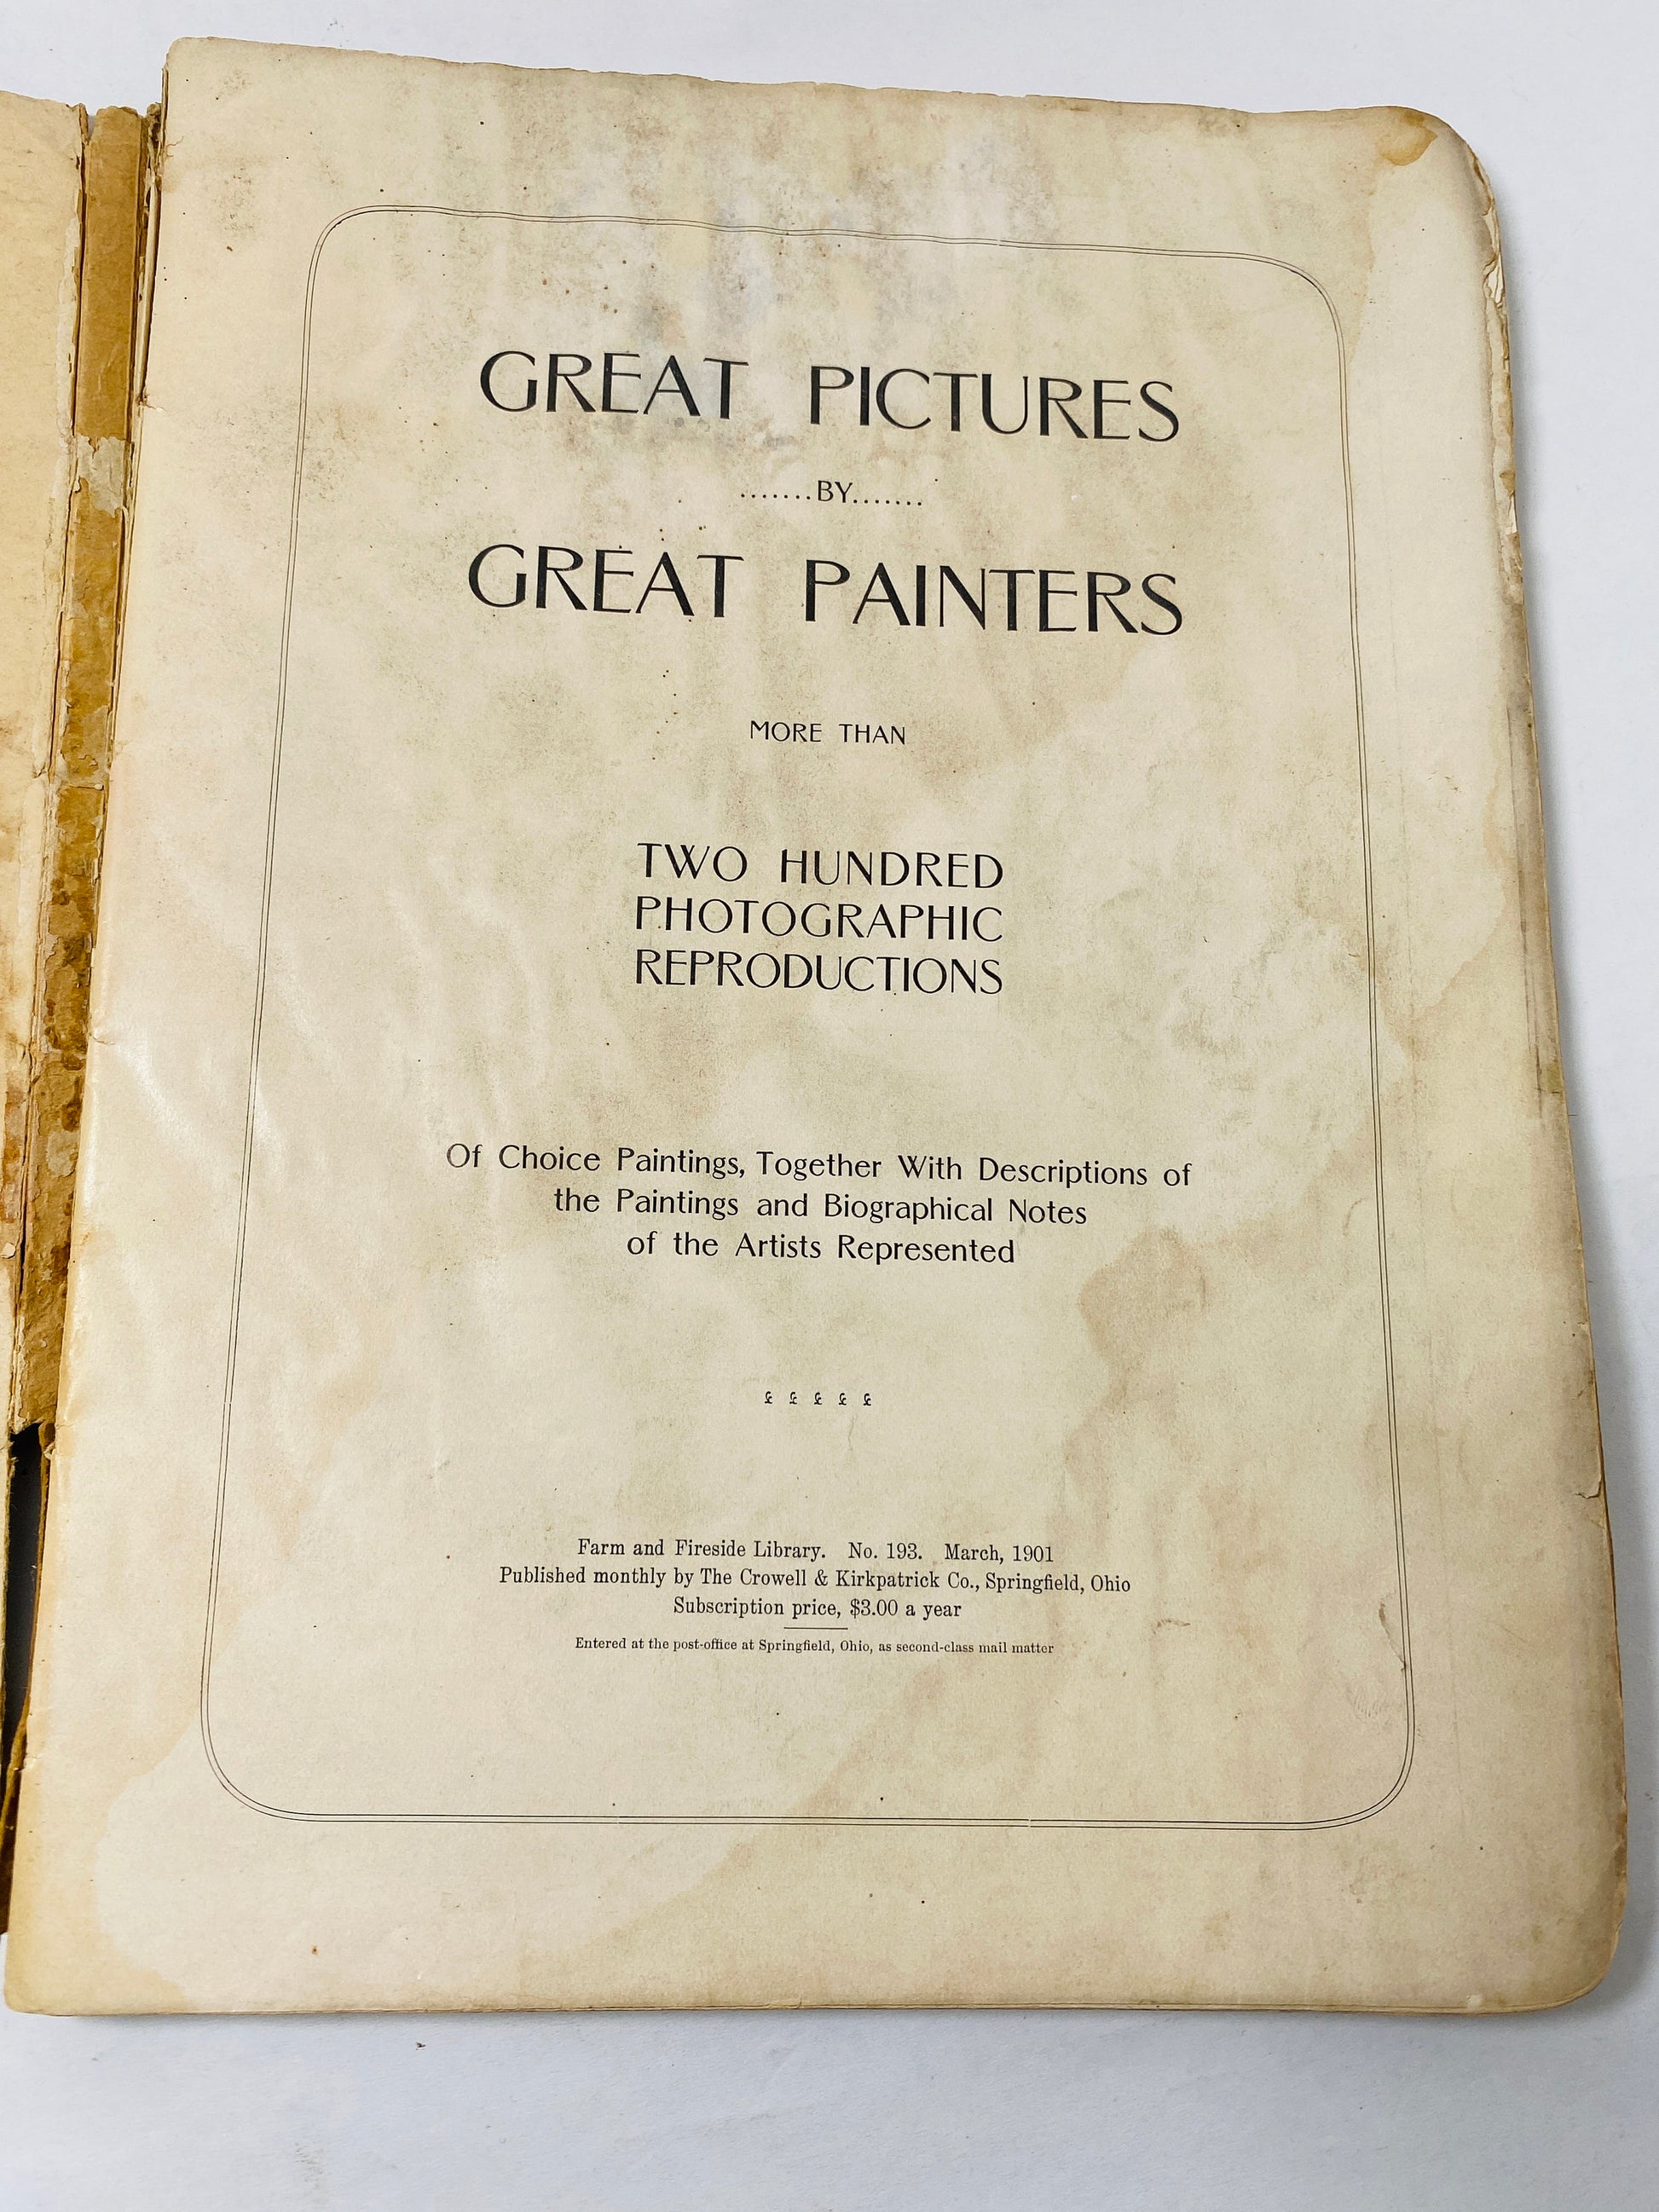 Vintage art book of painters and masters vintage paperback of 200 photographic reproductions antique printing circa 1901 POOR Condition